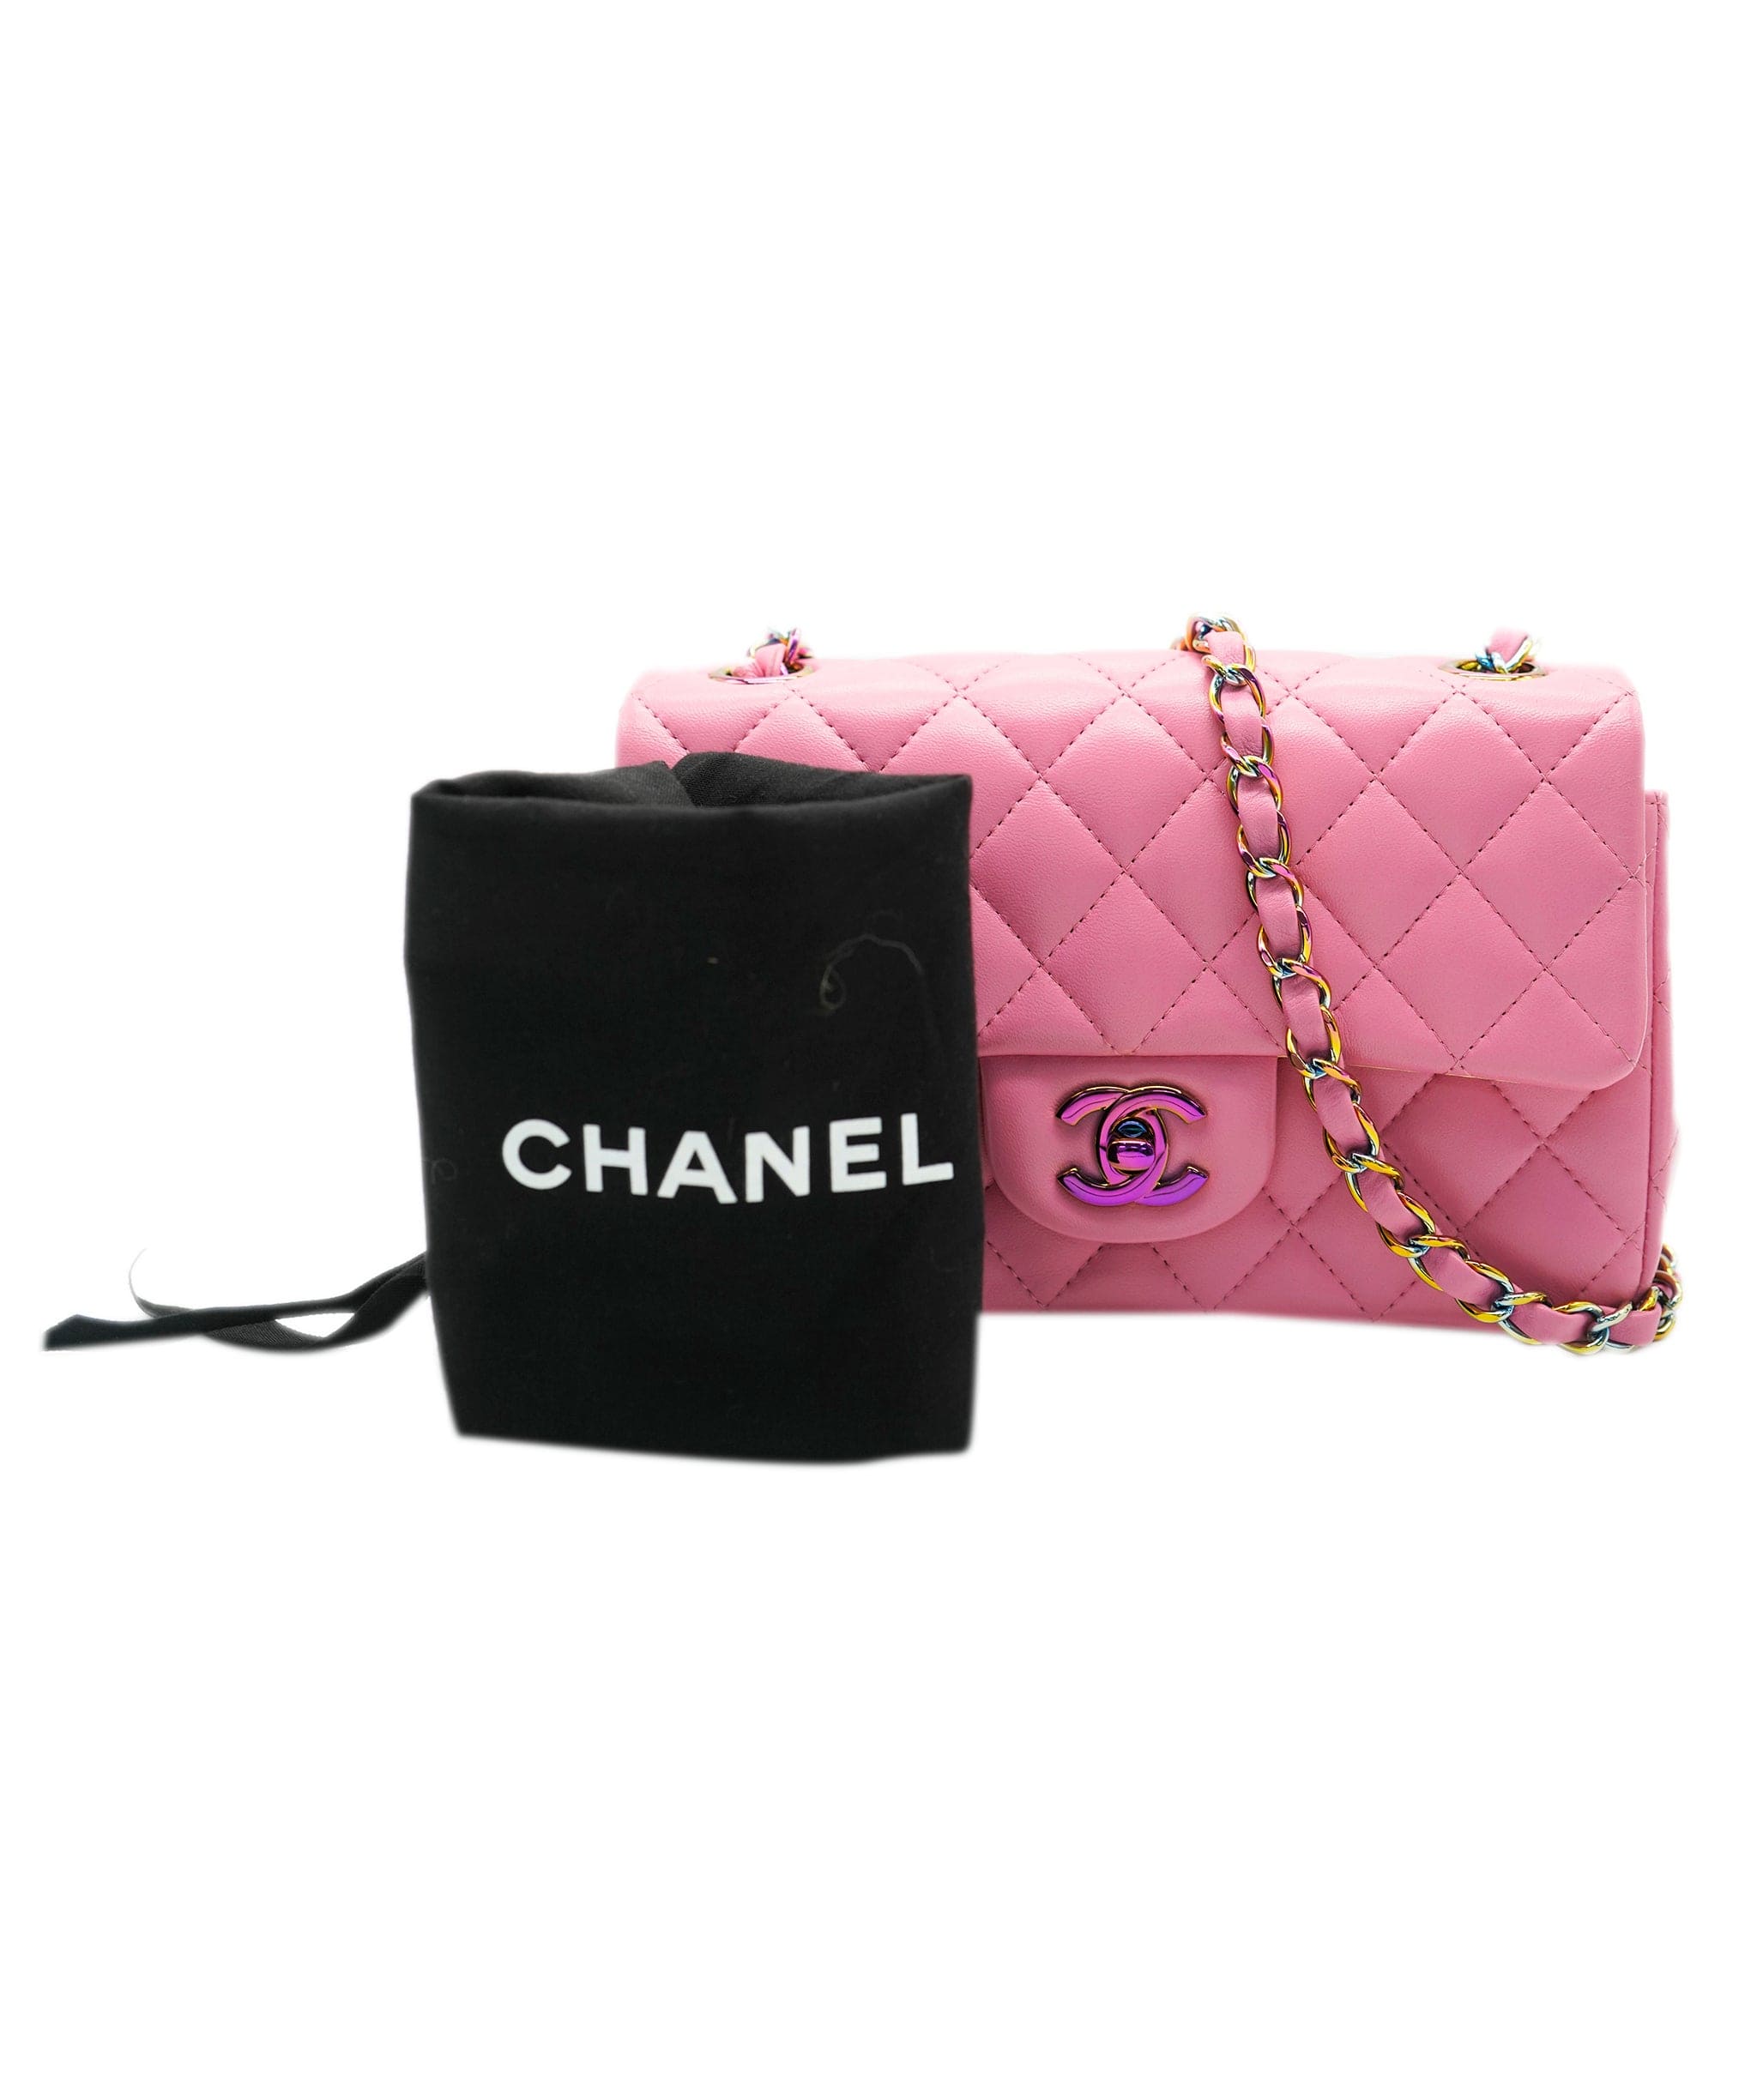 Chanel Chanel mini rectangle pink classic bag w/ iridescent clasp AVC1956